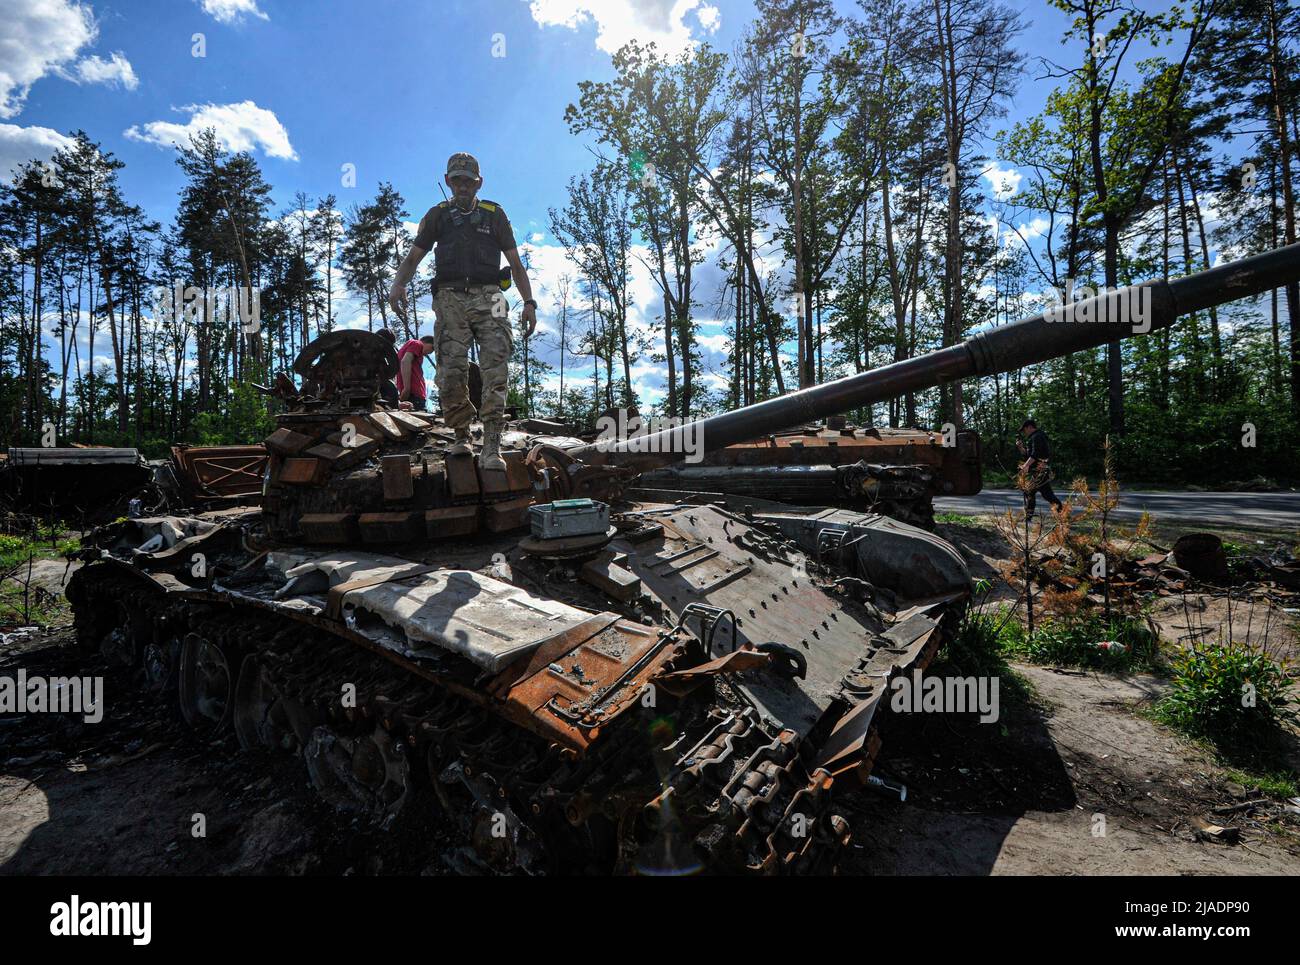 Dmytrivka, Ukraine. 29th May, 2022. A man looks at a destroyed Russian tank at Dmytrivka village near the Ukrainian capital Kyiv. Russia invaded Ukraine on 24 February 2022, triggering the largest military attack in Europe since World War II. Credit: SOPA Images Limited/Alamy Live News Stock Photo